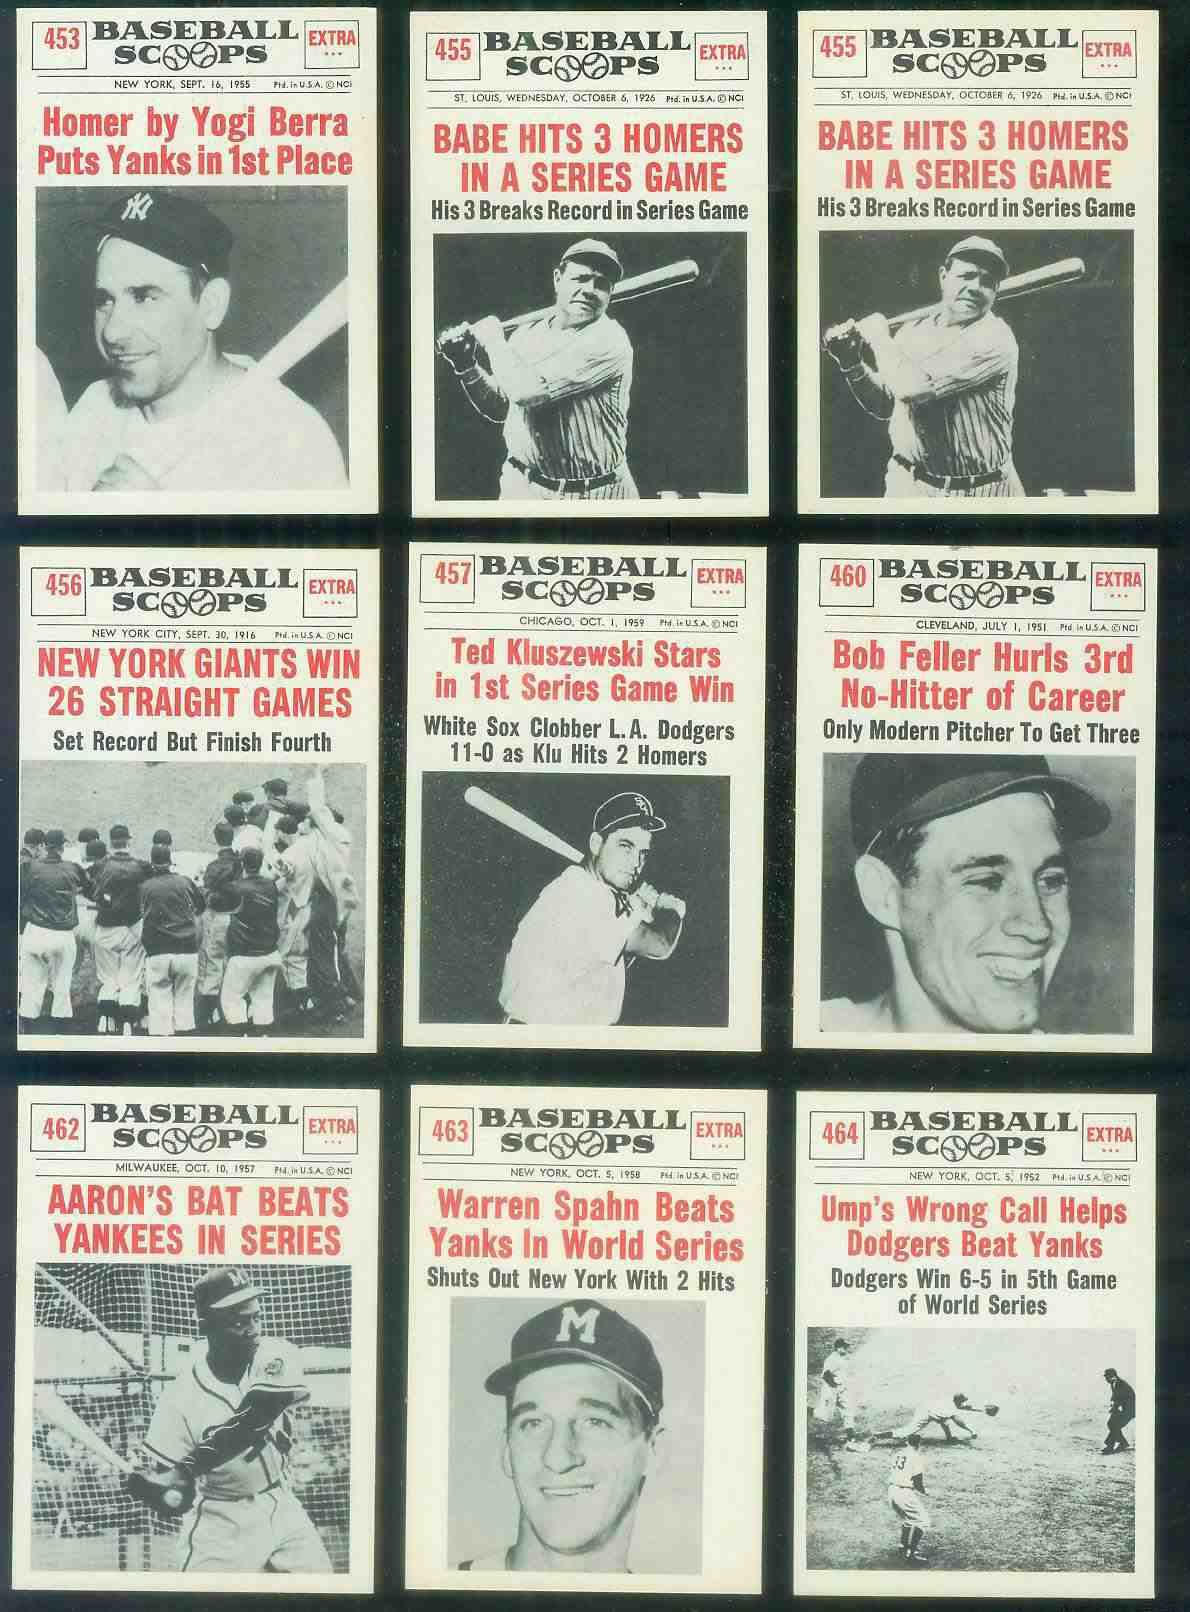 1961 Nu-Card Scoops #455 Babe Ruth (Yankees) Baseball cards value